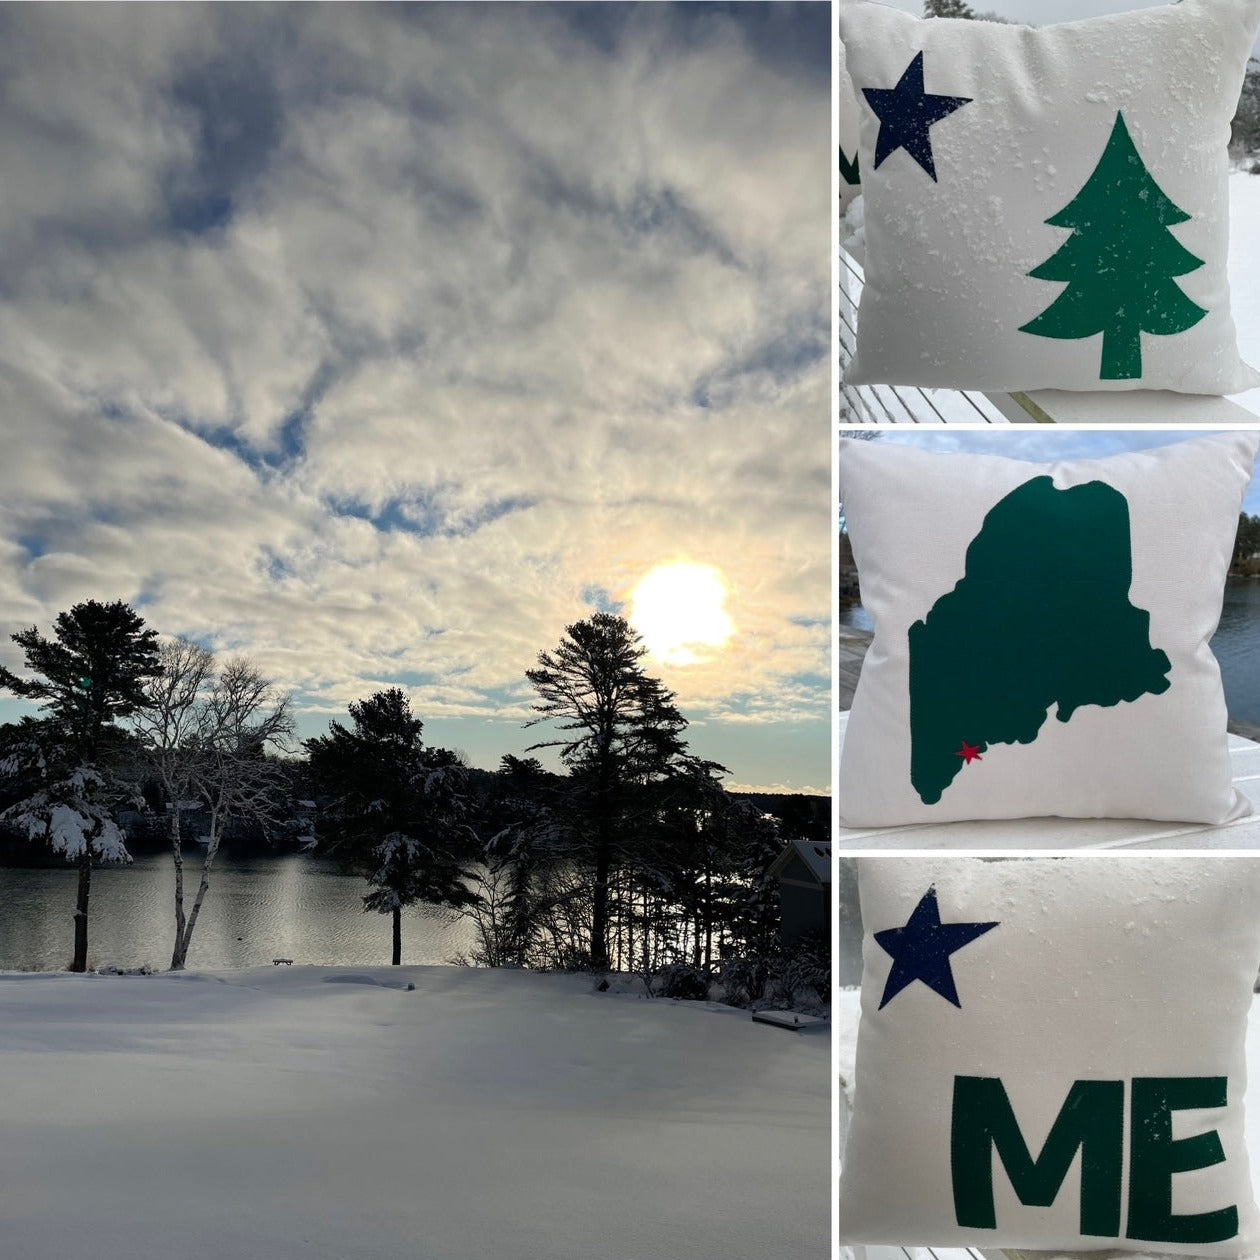 Maine State Flag Pillow